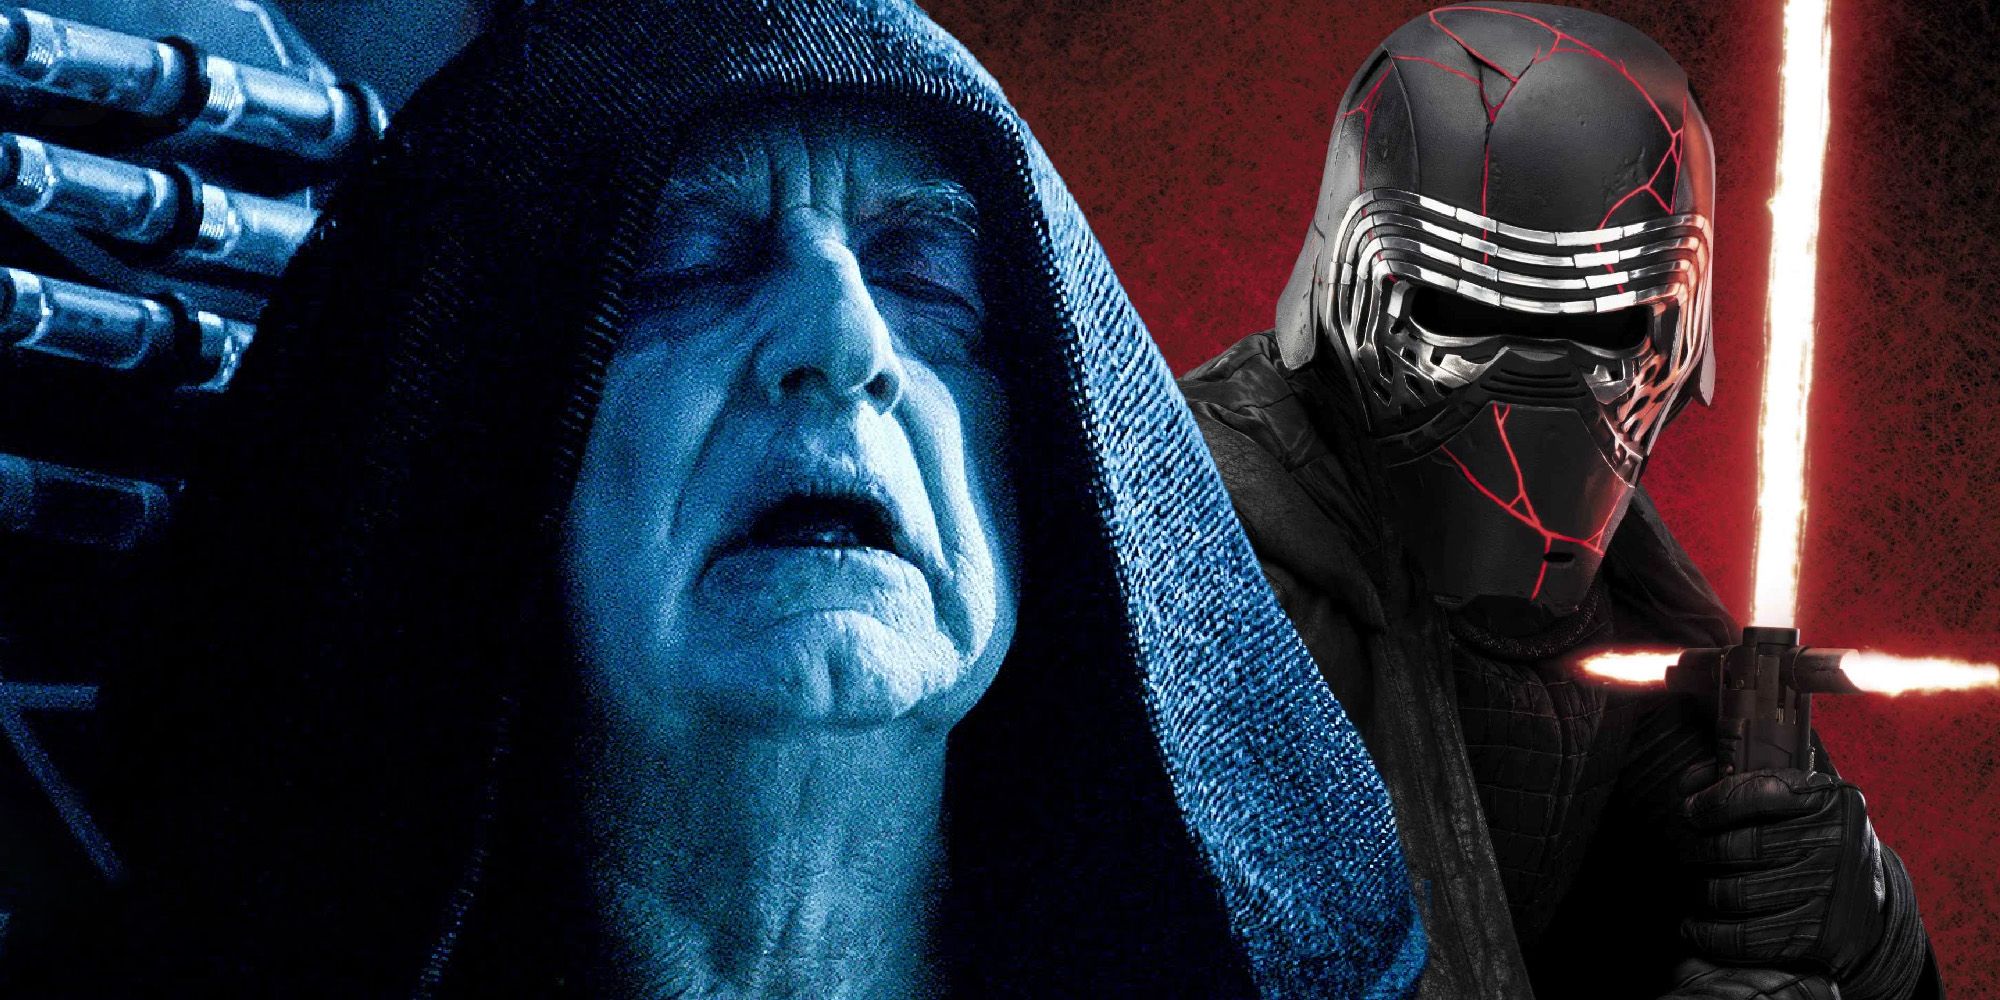 Star Wars Explains Why Palpatine Easily Turned Ben Solo To The Dark Side